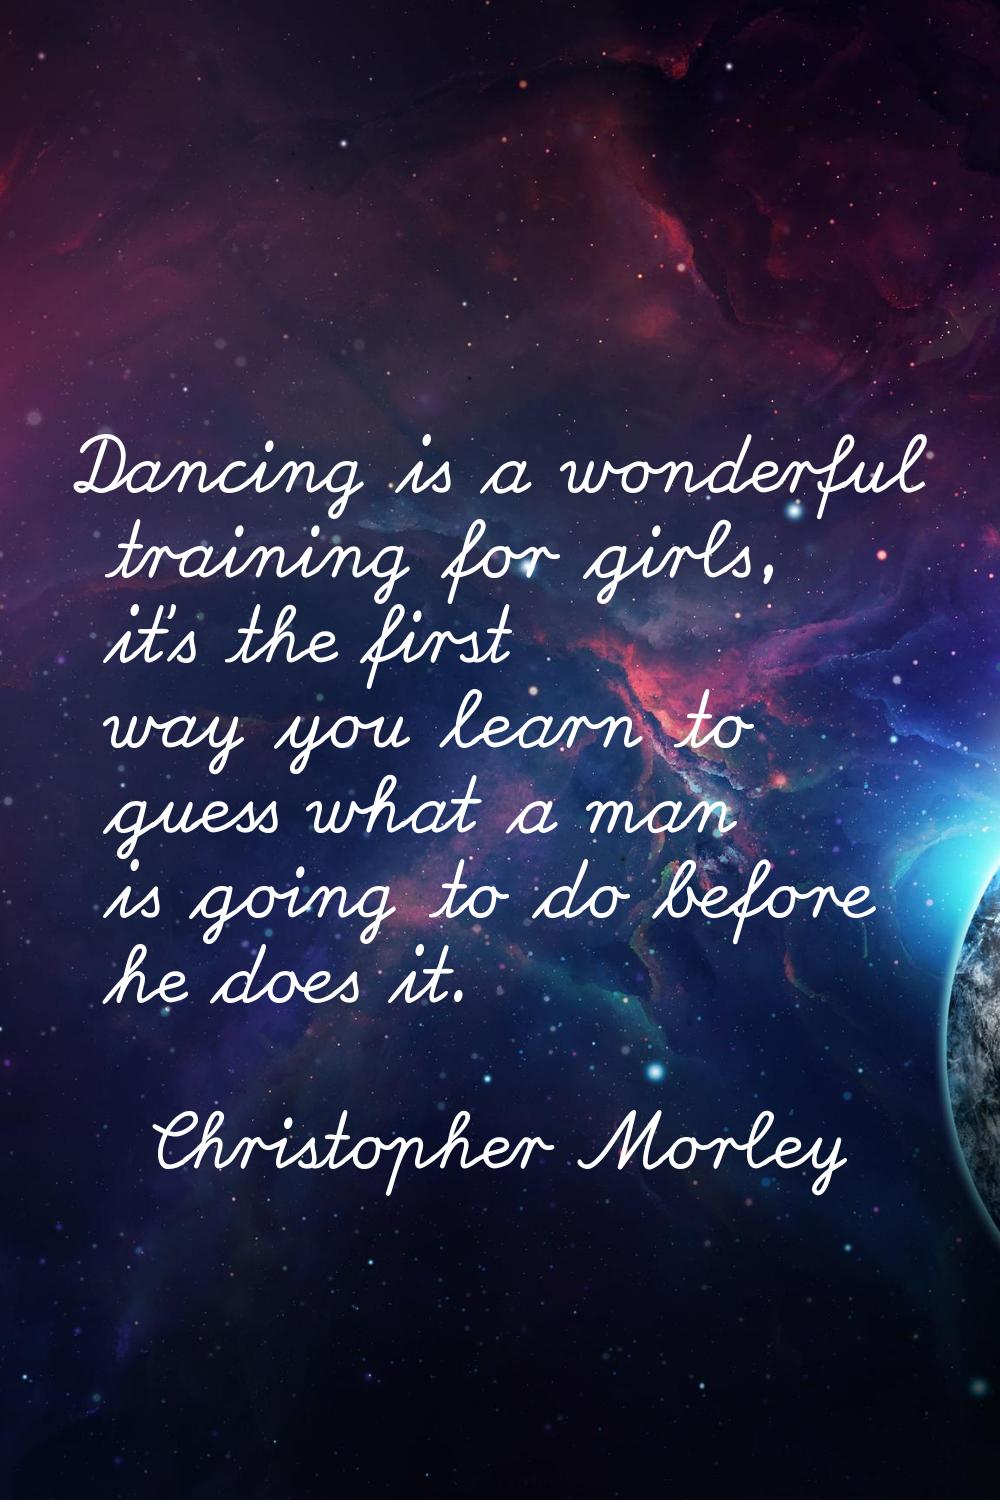 Dancing is a wonderful training for girls, it's the first way you learn to guess what a man is goin